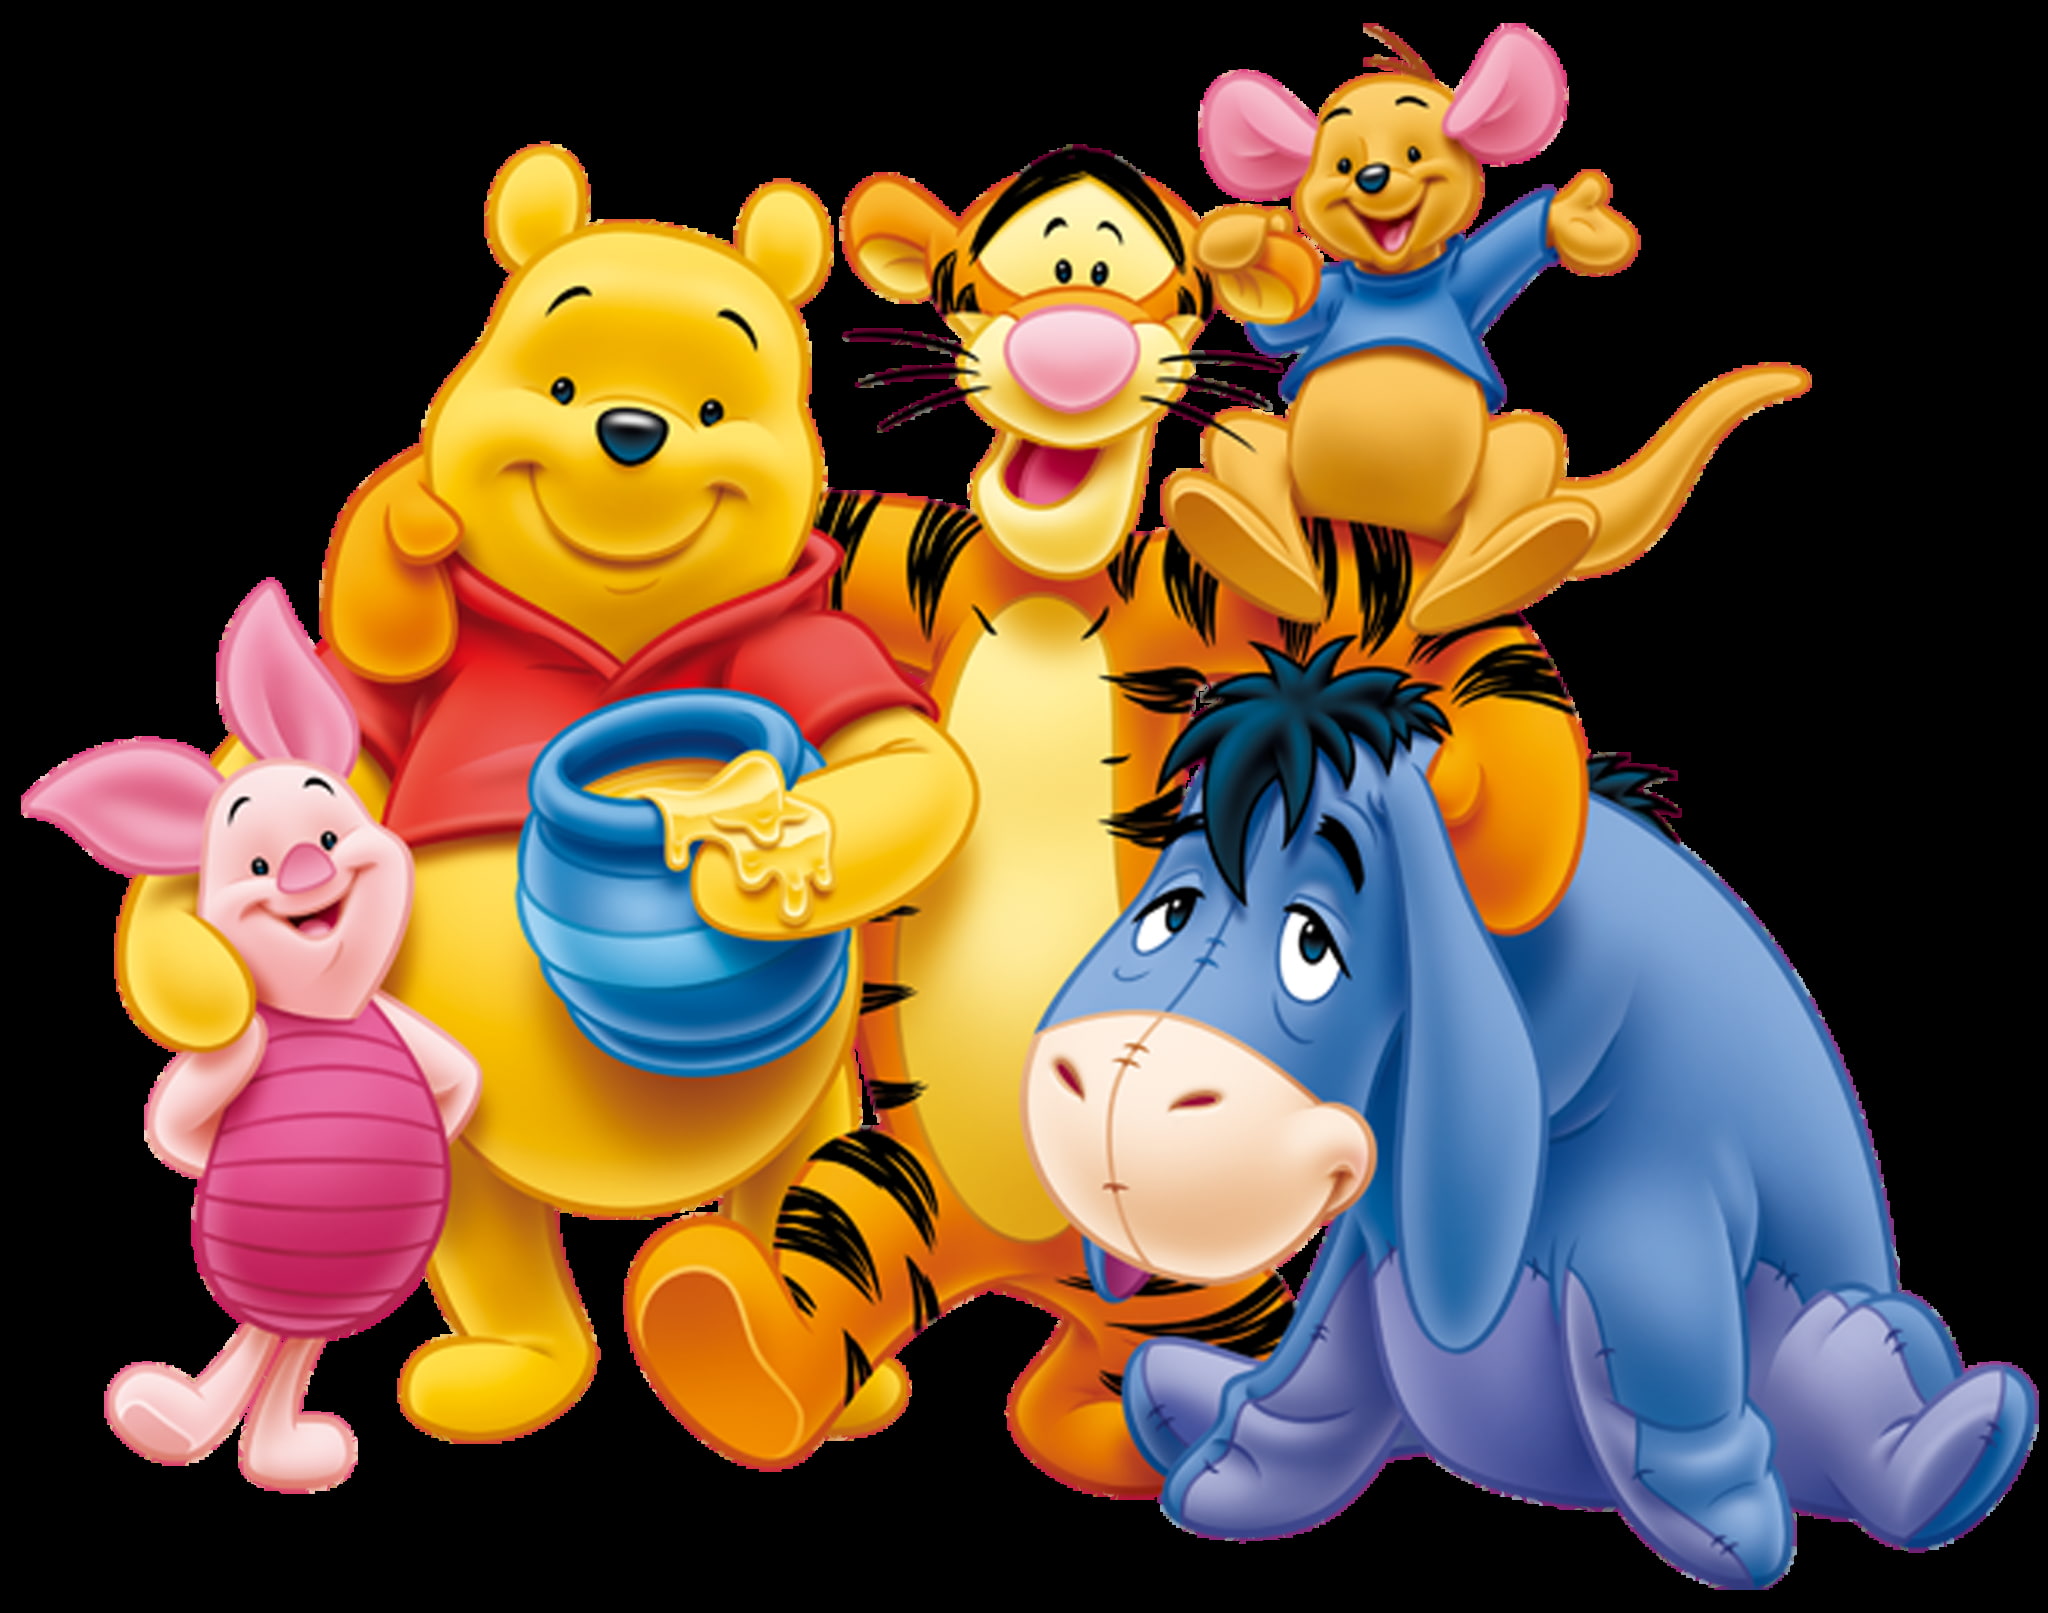 winnie the pooh theme background images, representation, multi colored